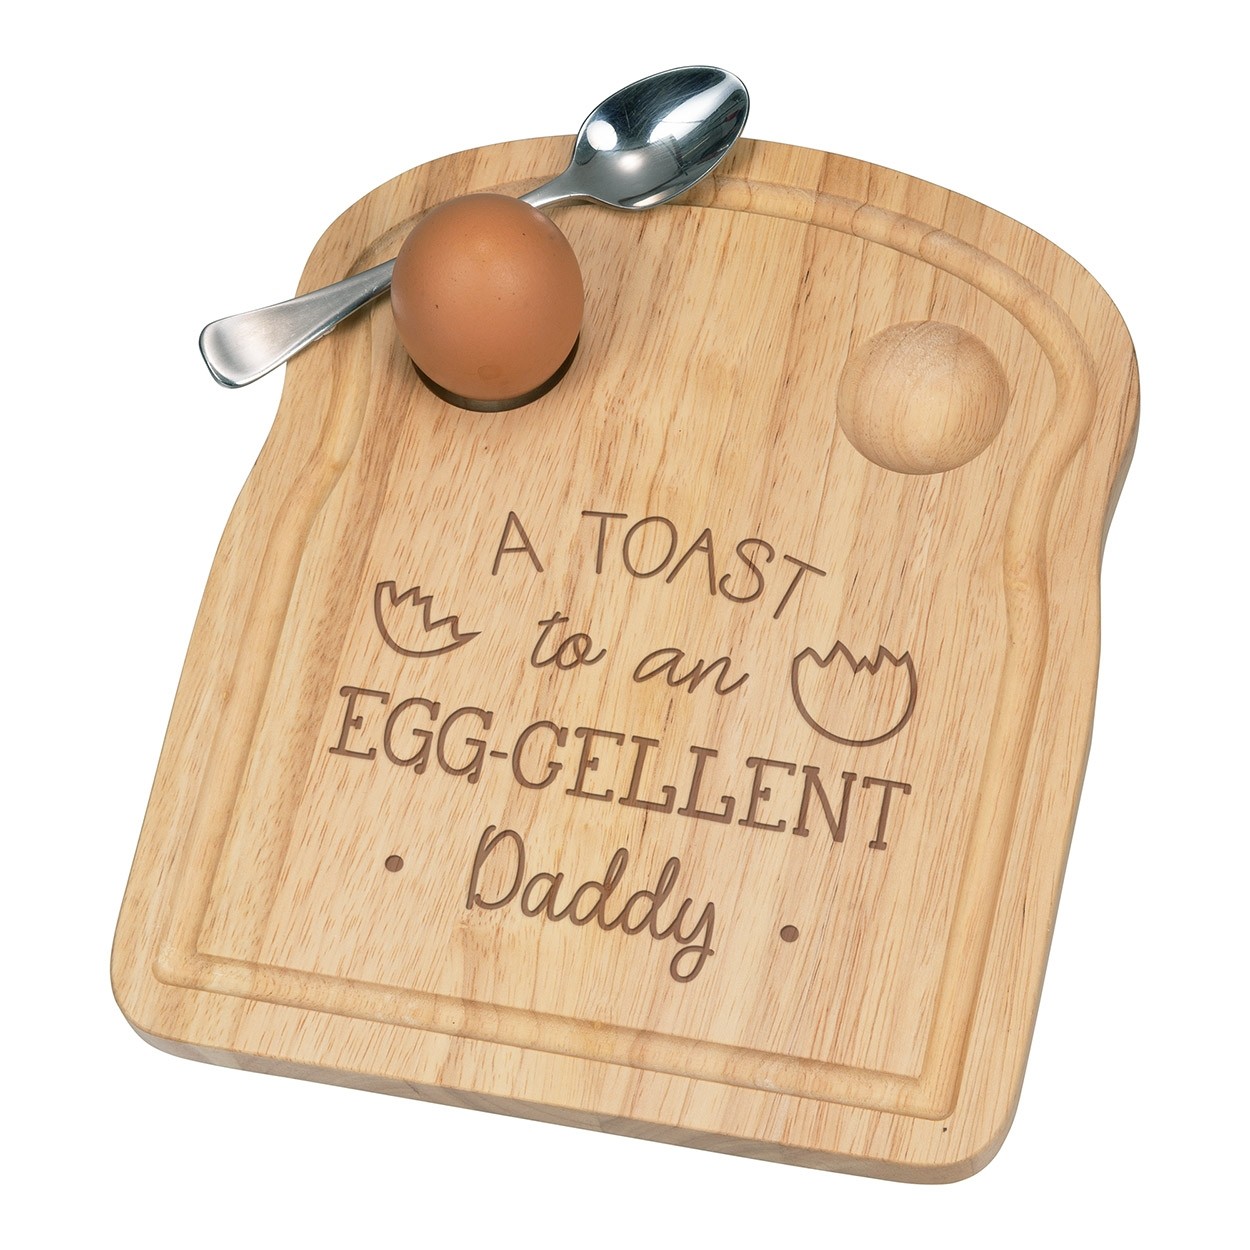 Personalised Custom Name A Toast To An Eggcellent Breakfast Dippy Egg Cup Board Wooden